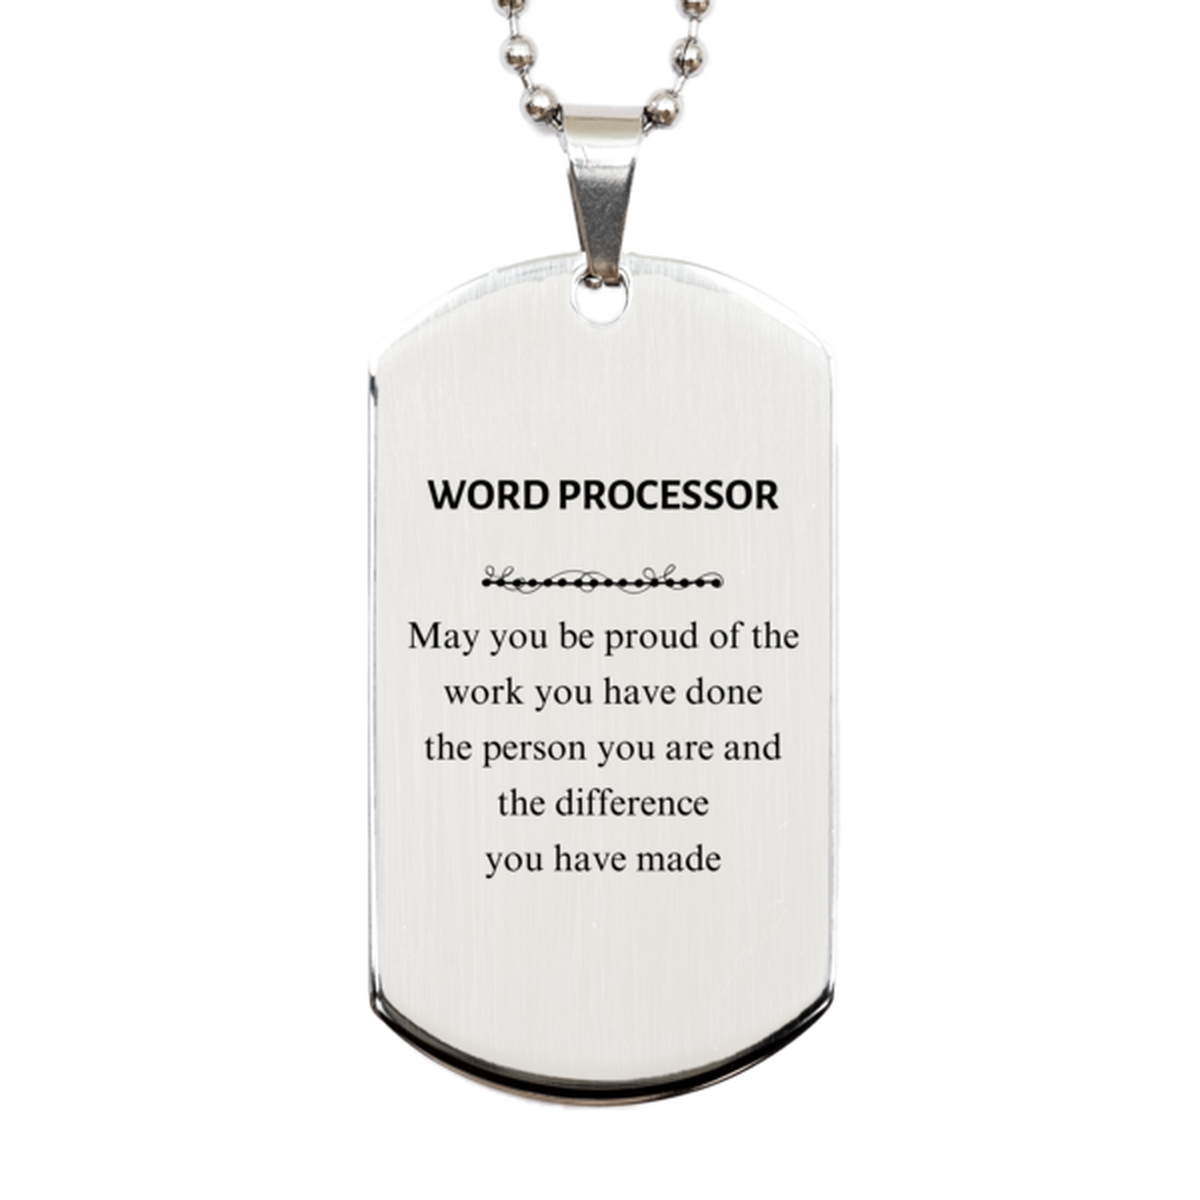 Word Processor May you be proud of the work you have done, Retirement Word Processor Silver Dog Tag for Colleague Appreciation Gifts Amazing for Word Processor